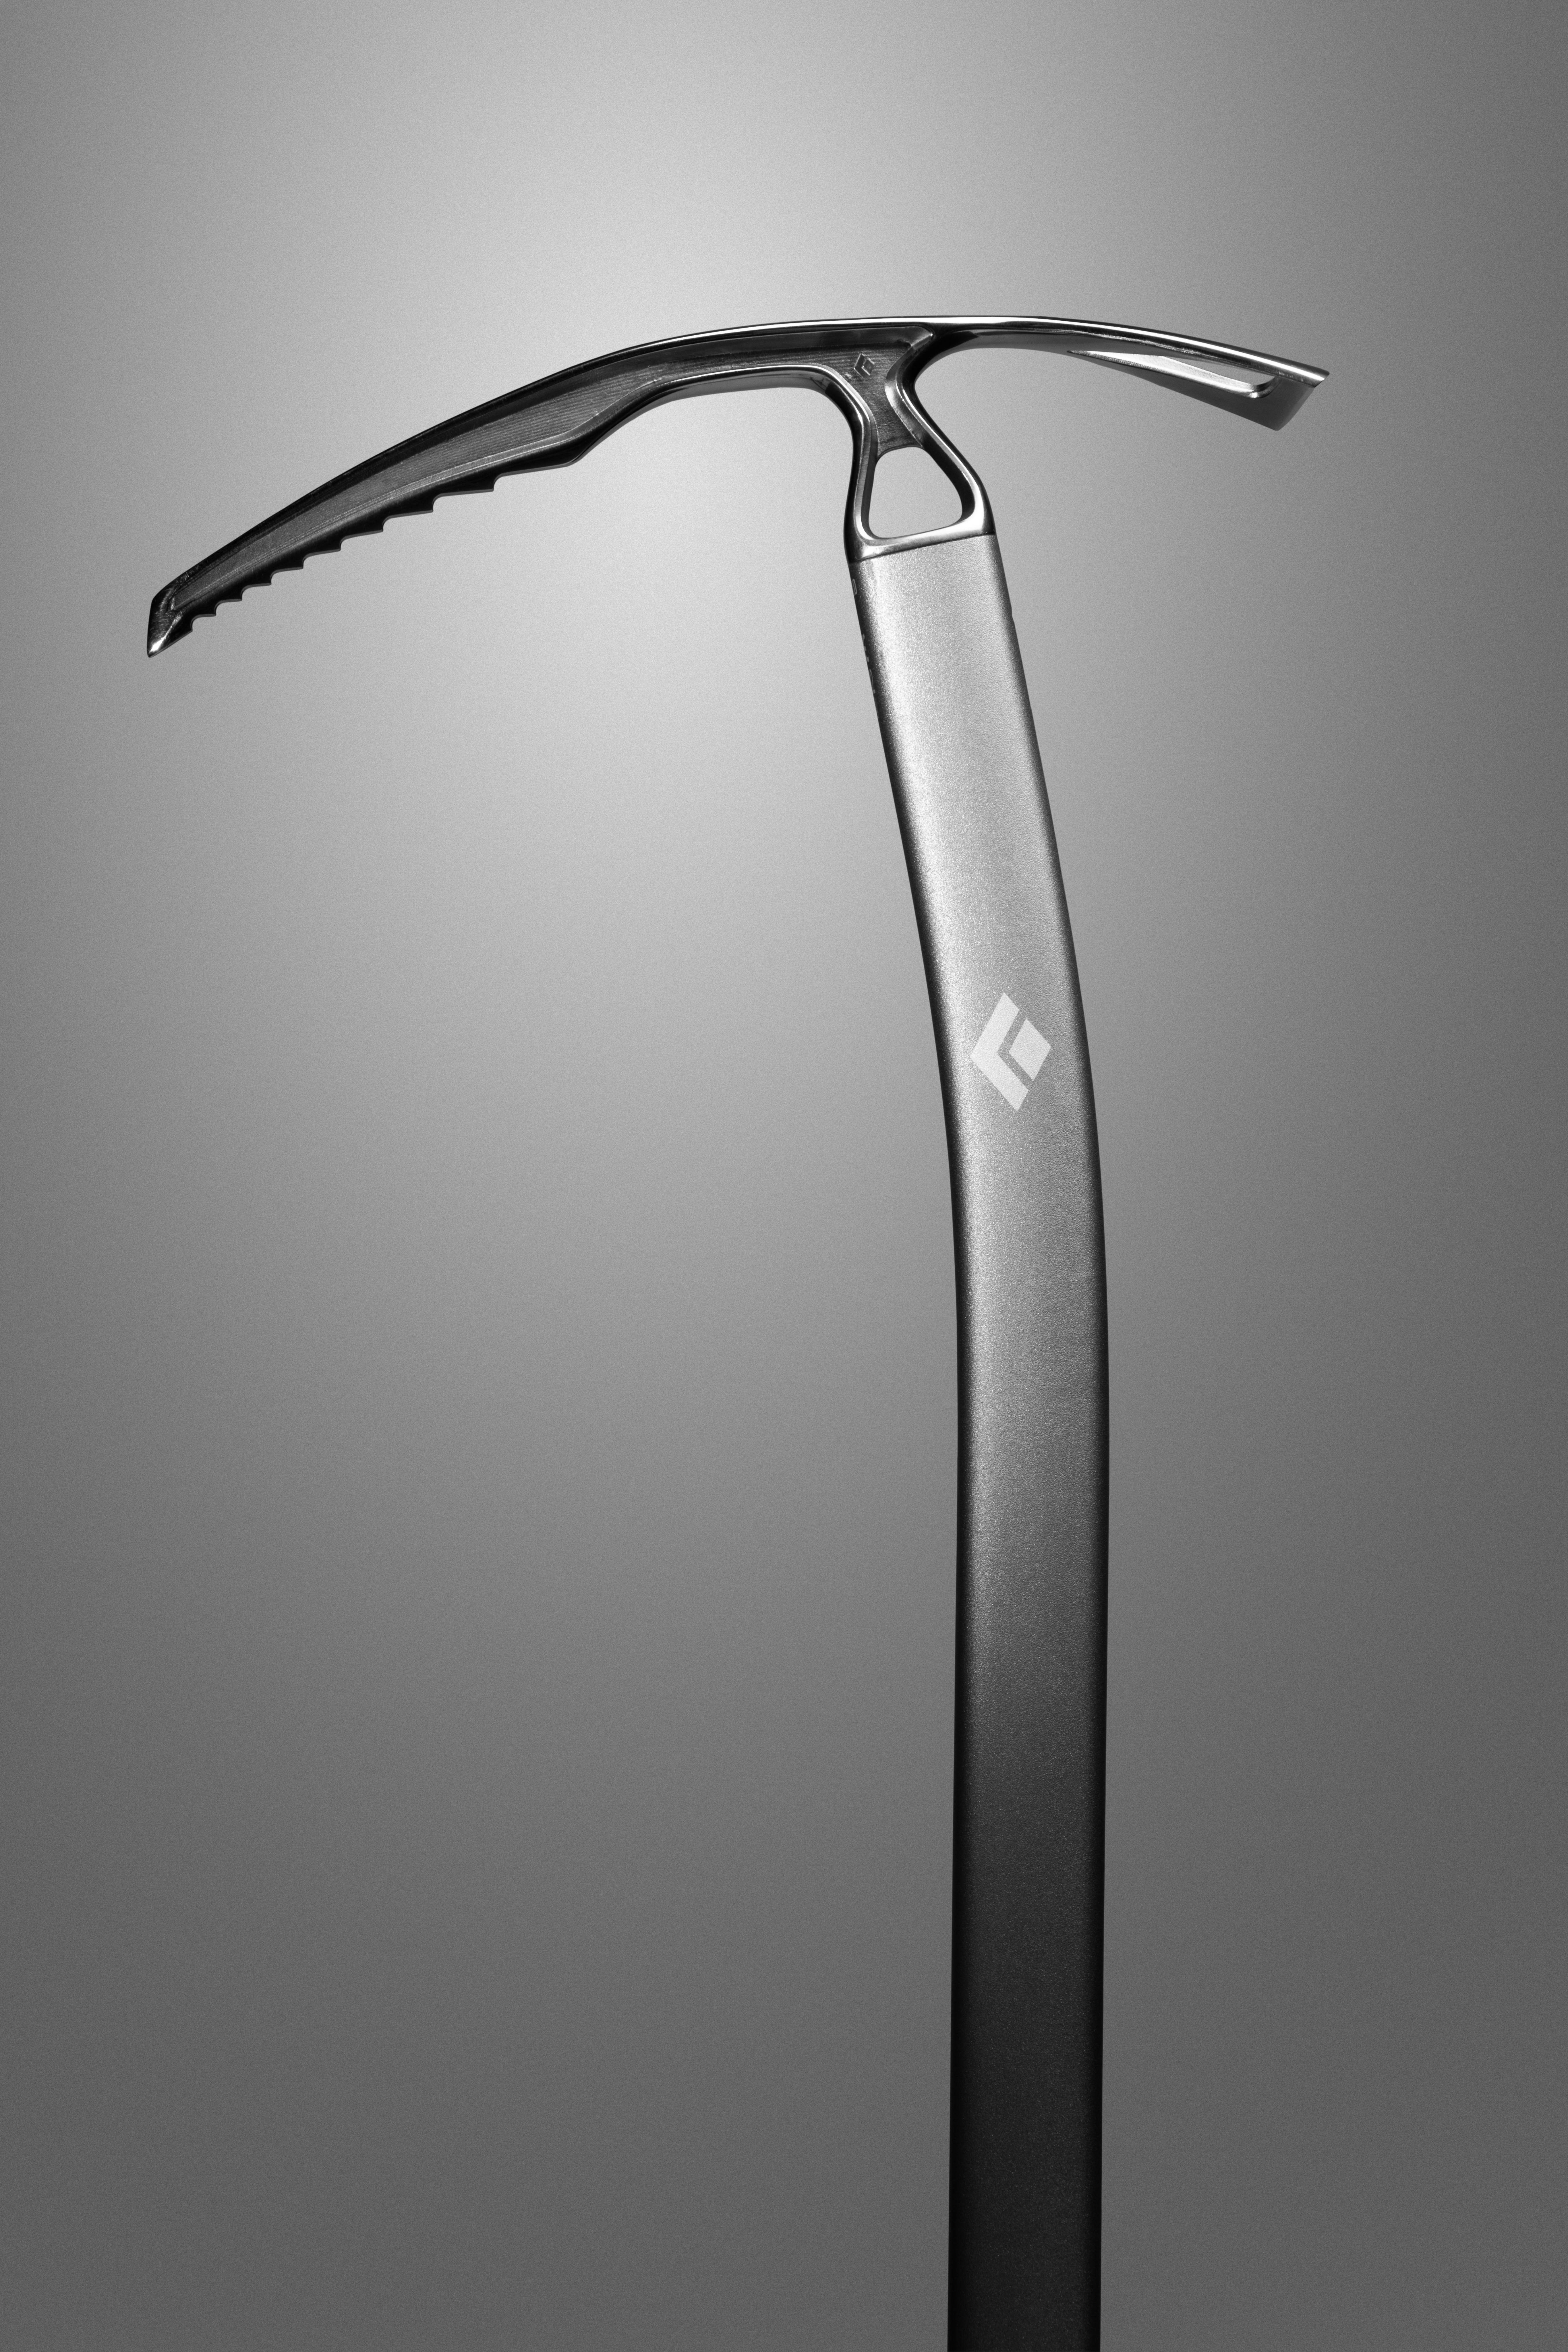 A studio glam of the Raven Pro Ice Axe from the side.